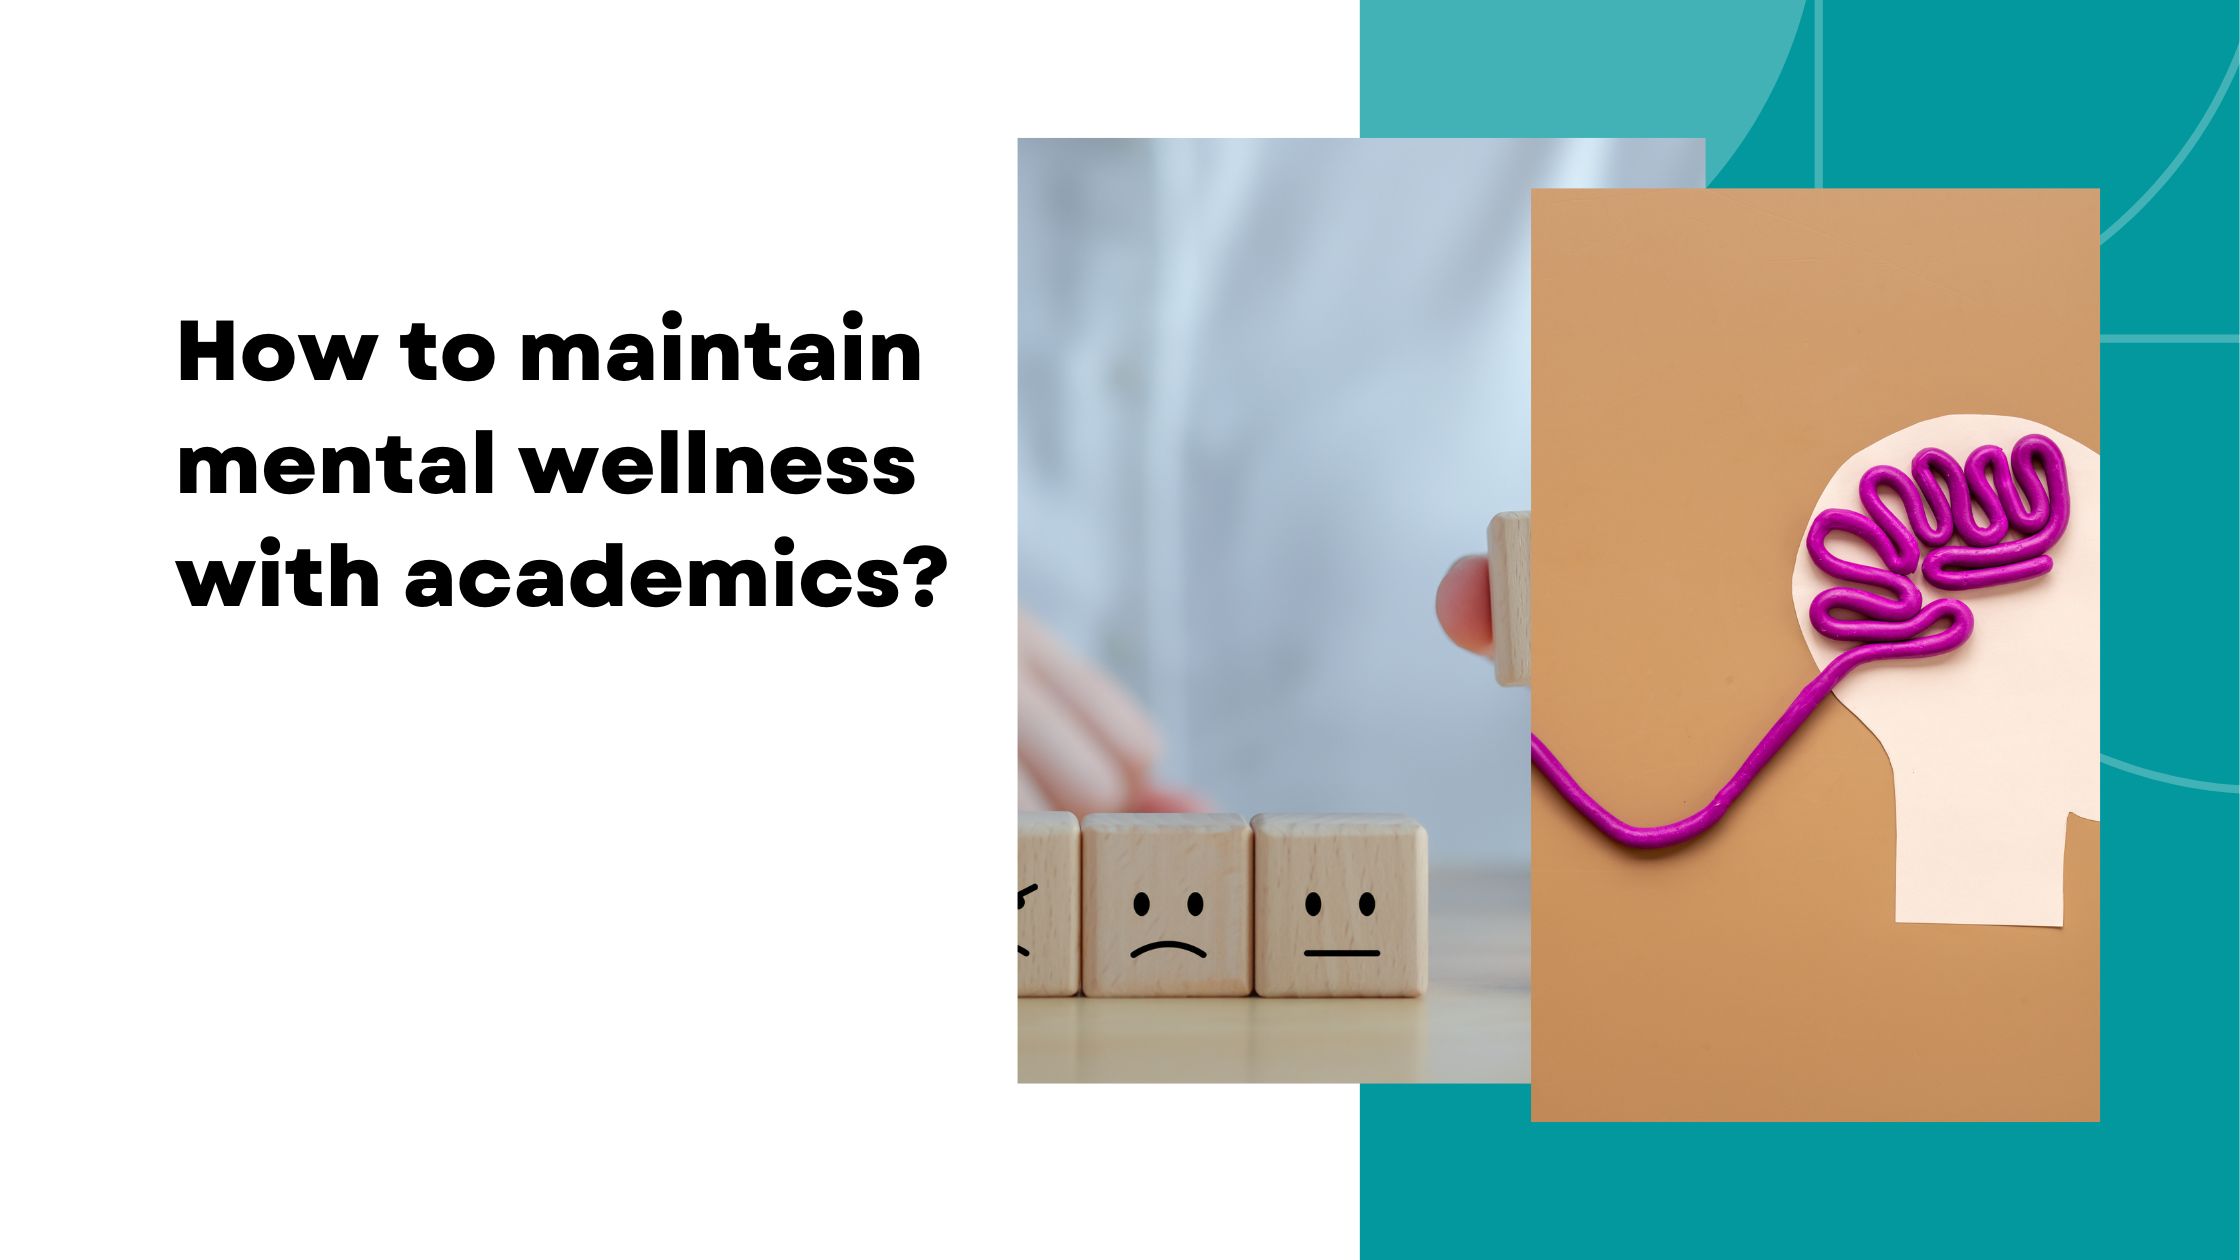 How to maintain mental wellness with academics?